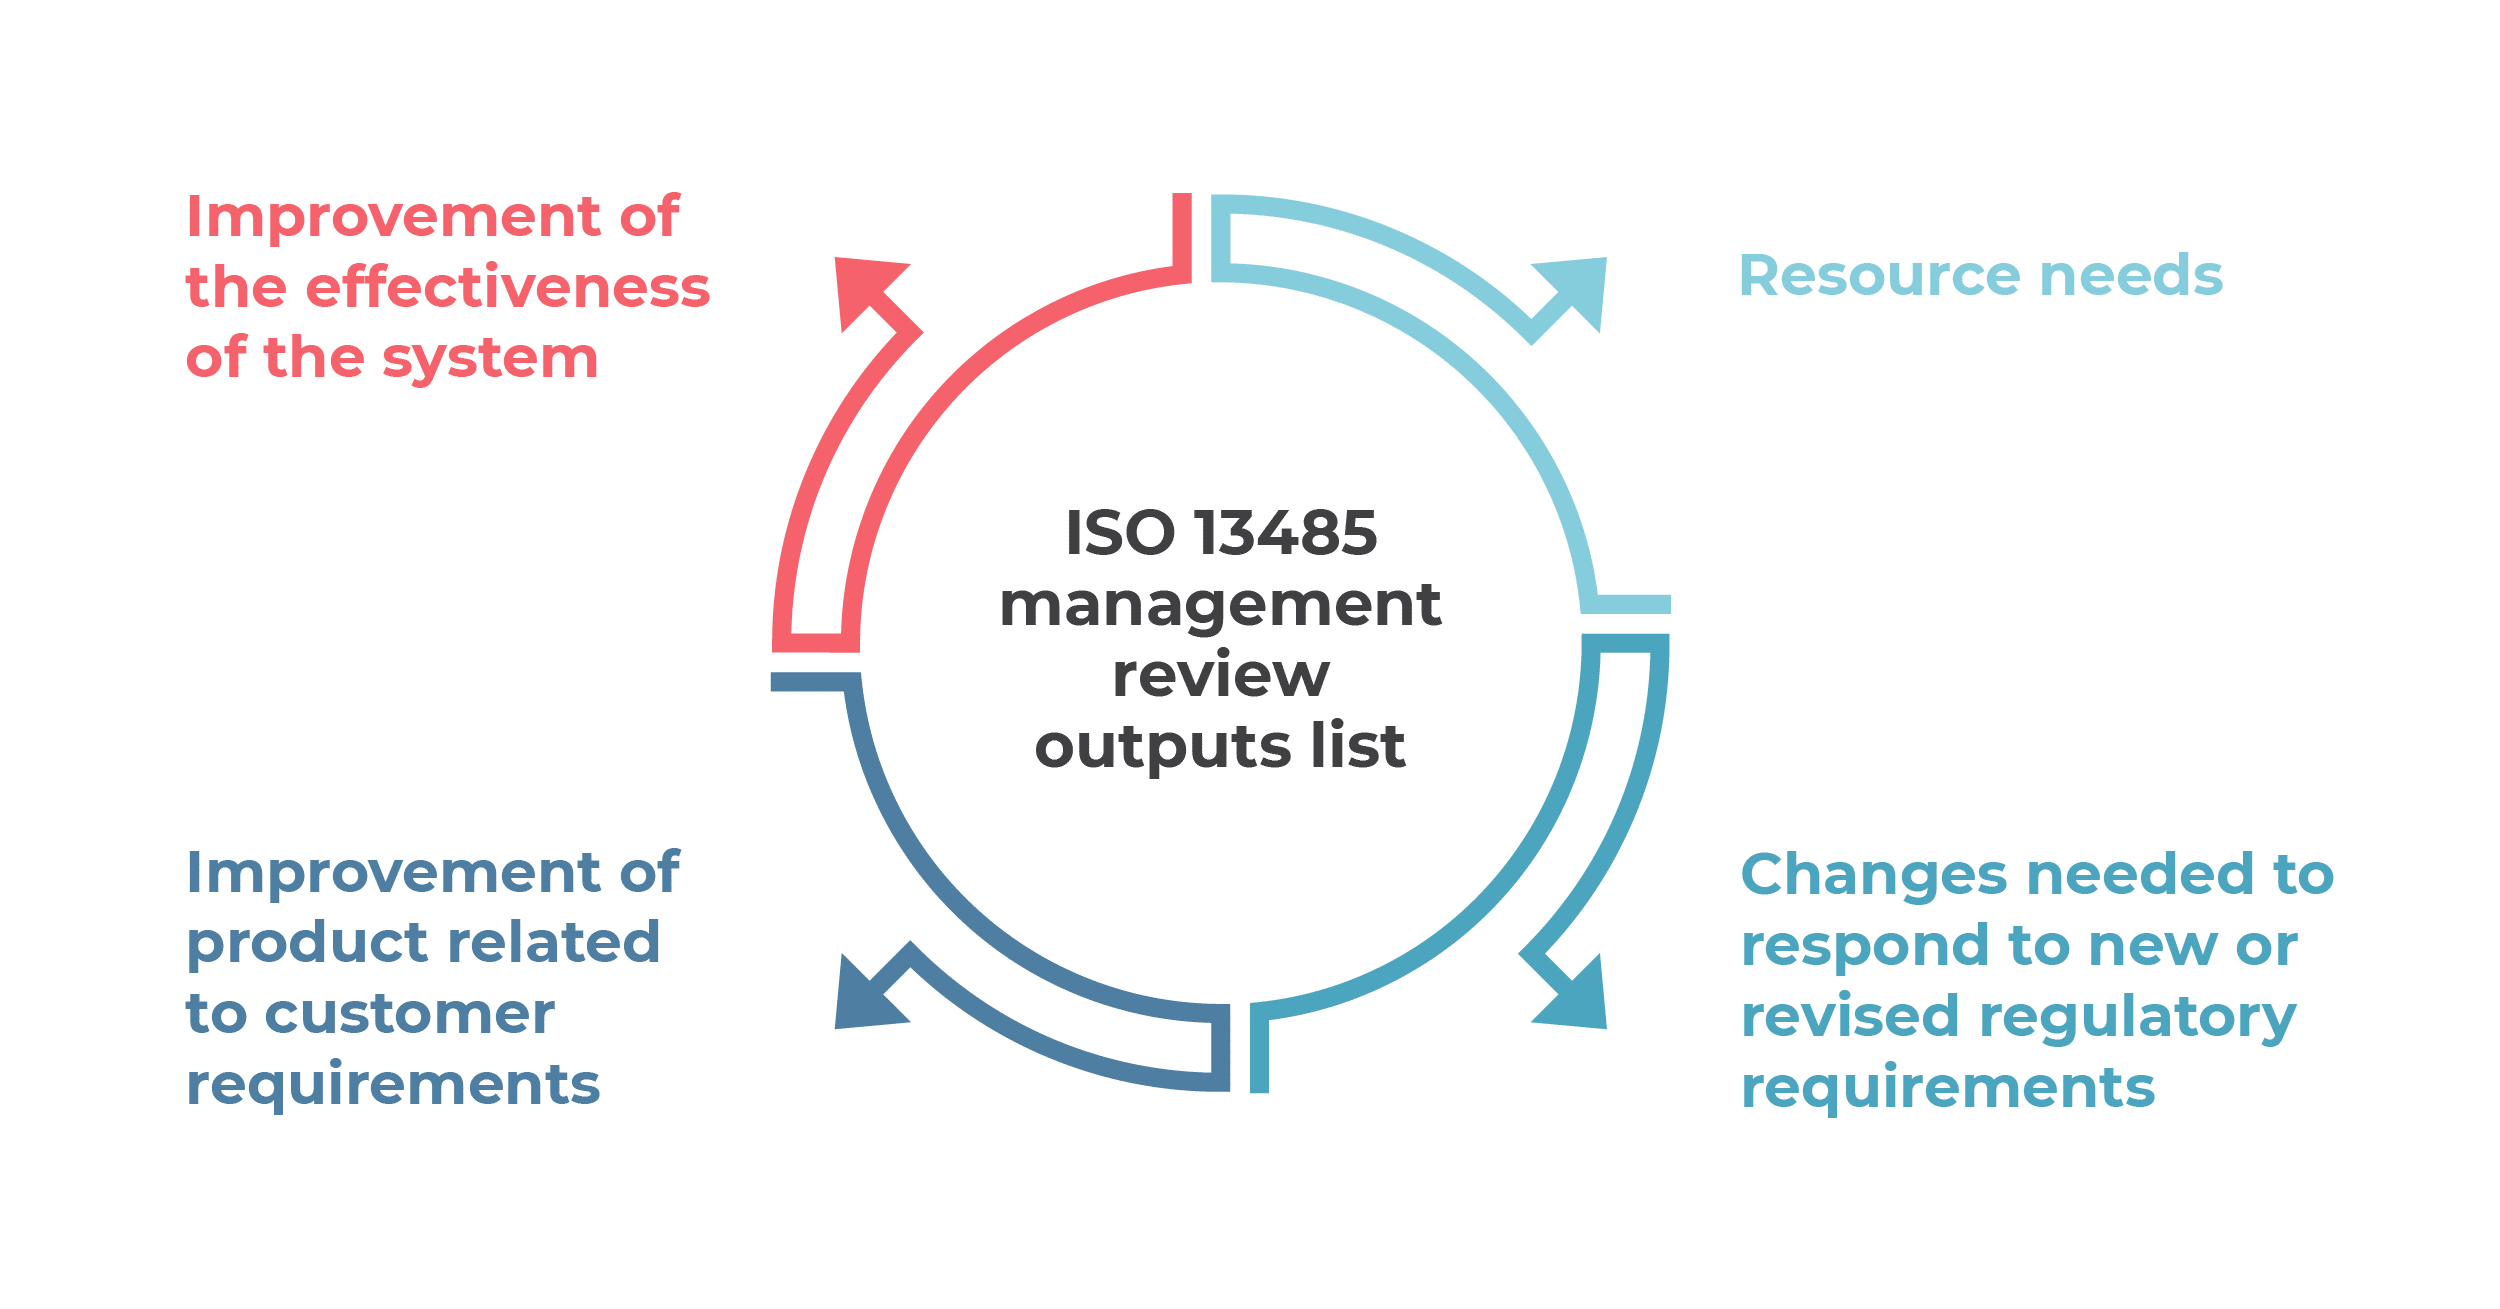 ISO 13485 management review outputs list